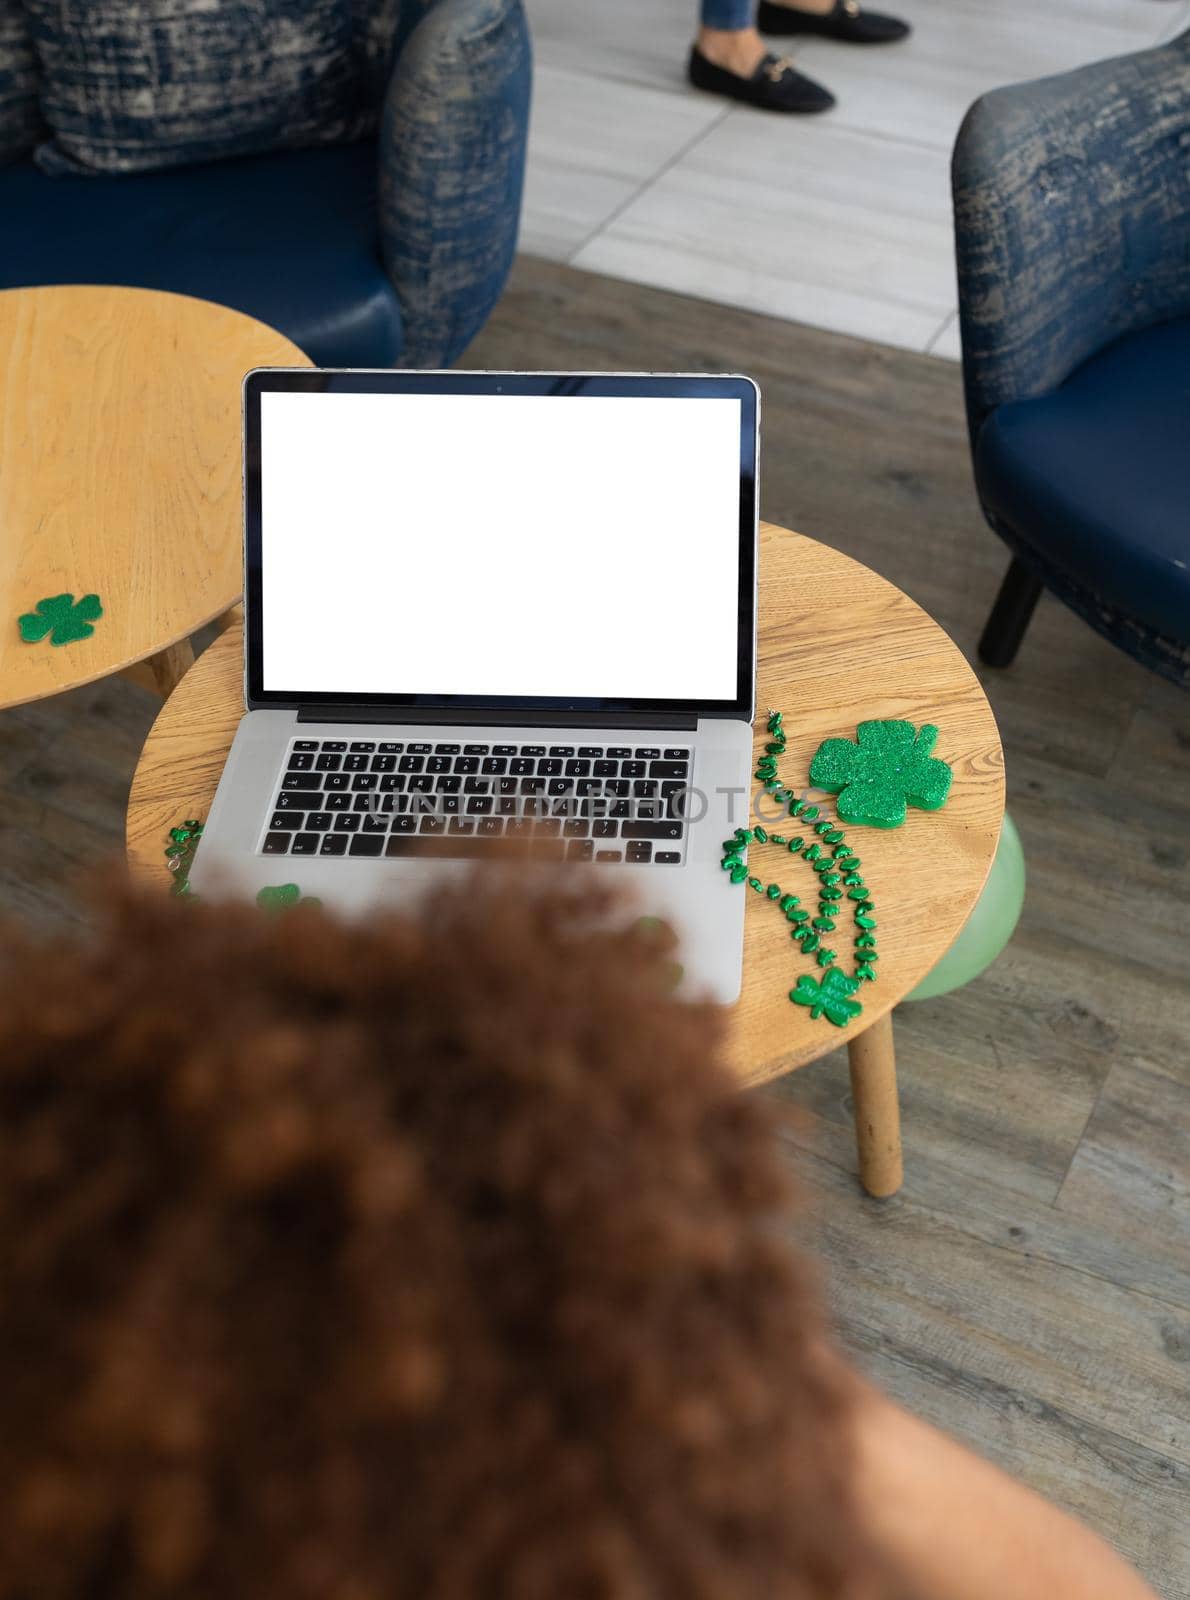 Mixed race woman celebrating st patrick's day on laptop video call with copy space on screen. fun during celebration of the irish patron saint's day.